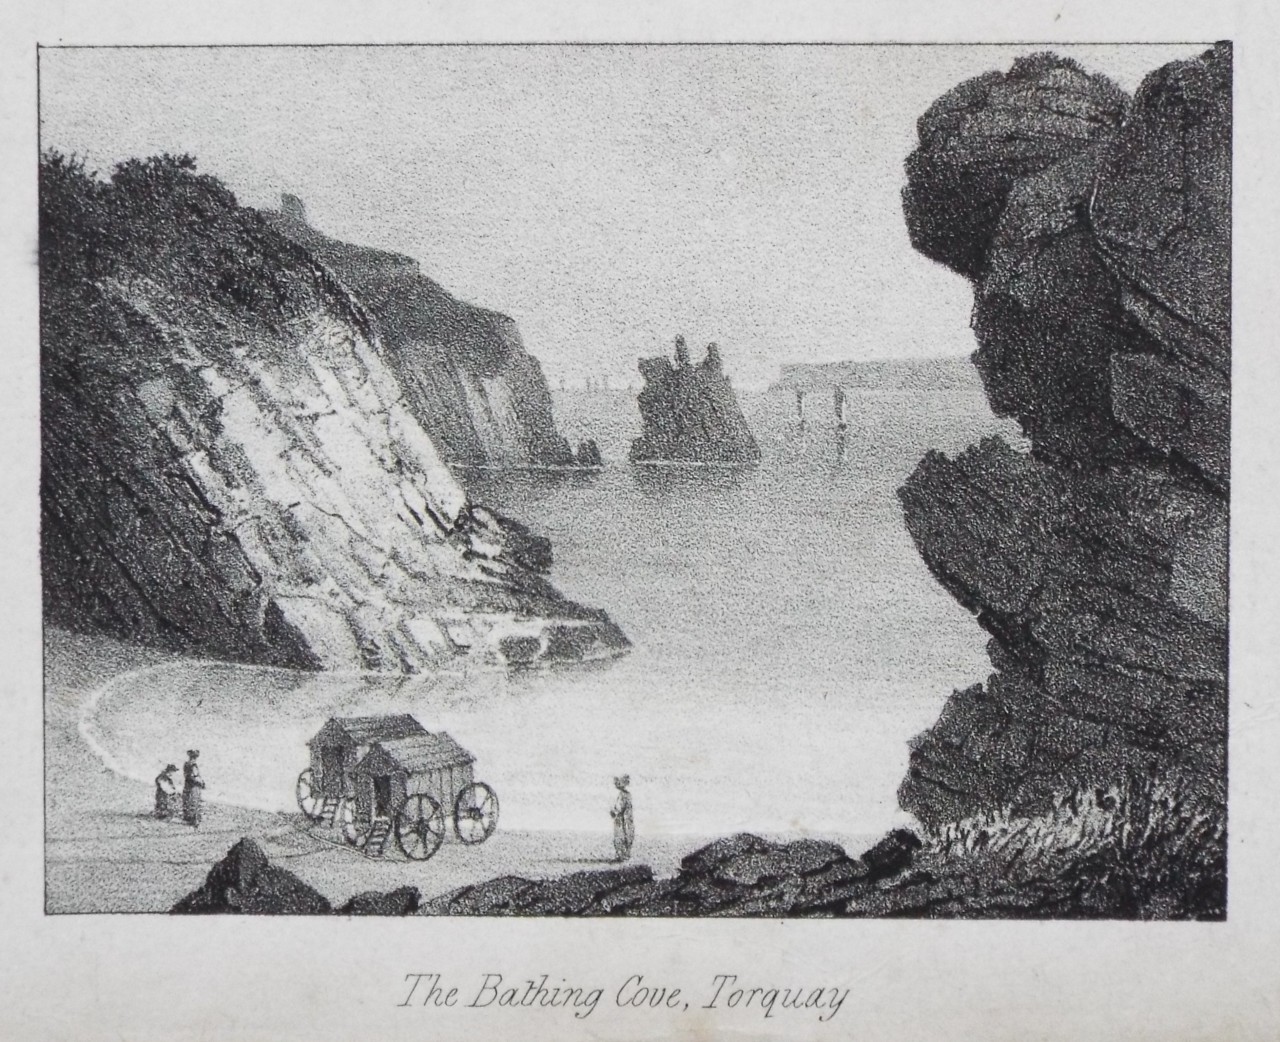 Lithograph - The Bathing Cove, Torquay